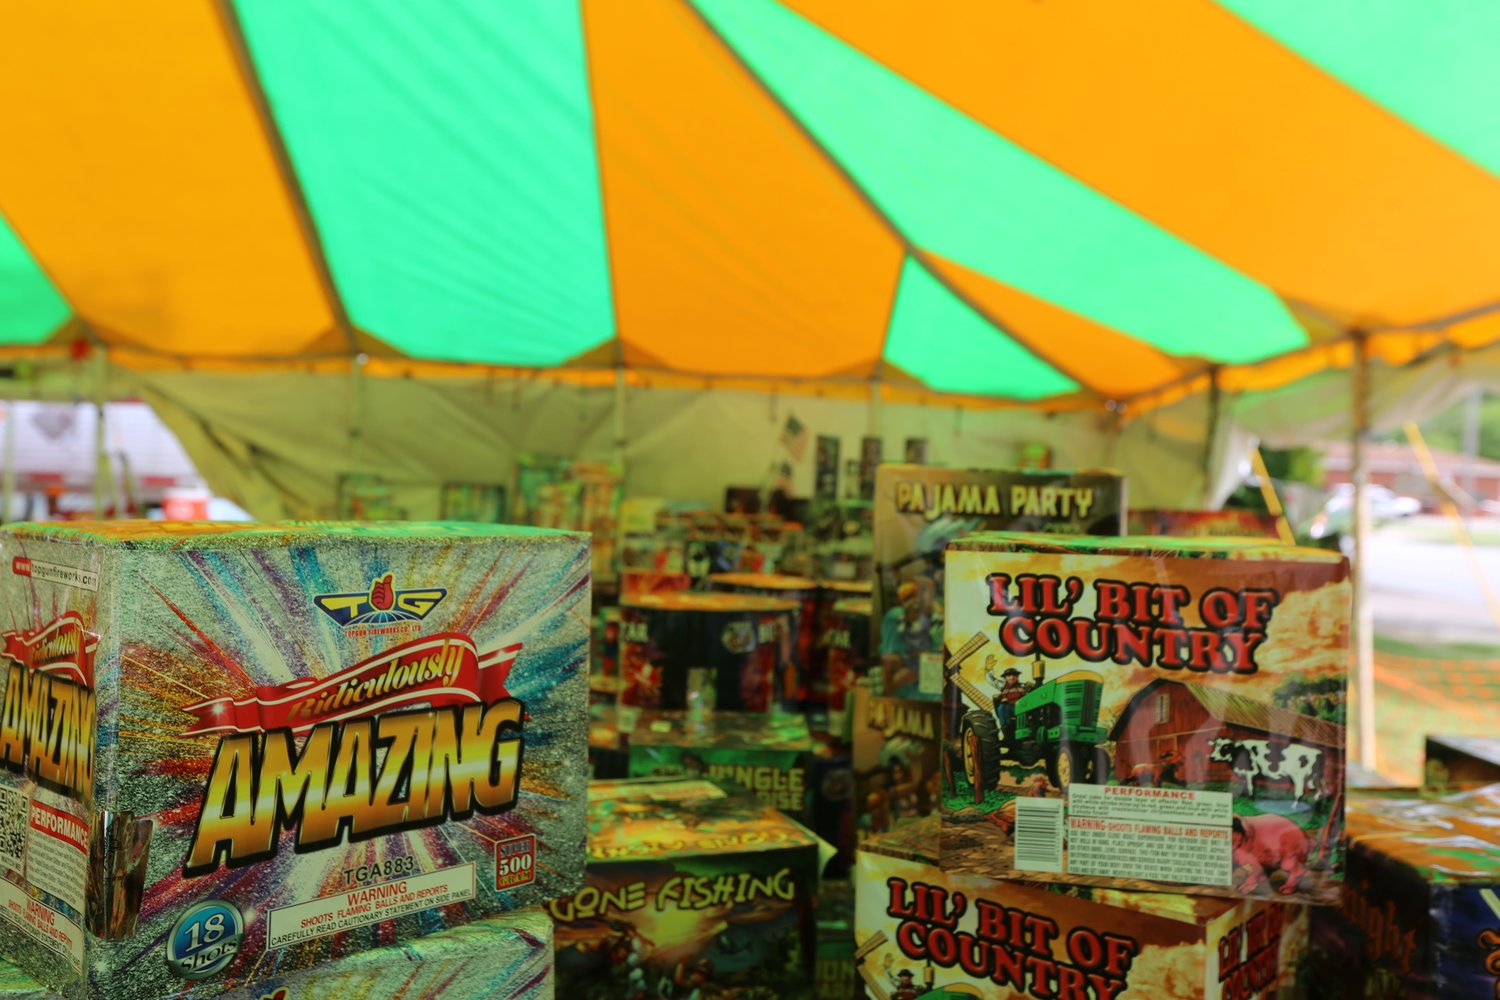 Officials are urging the public to only use fireworks sold at licensed tents, such as those shown here at the Kaboomers tent in Pittsburg, rather than buying black market fireworks or trying to make their own.